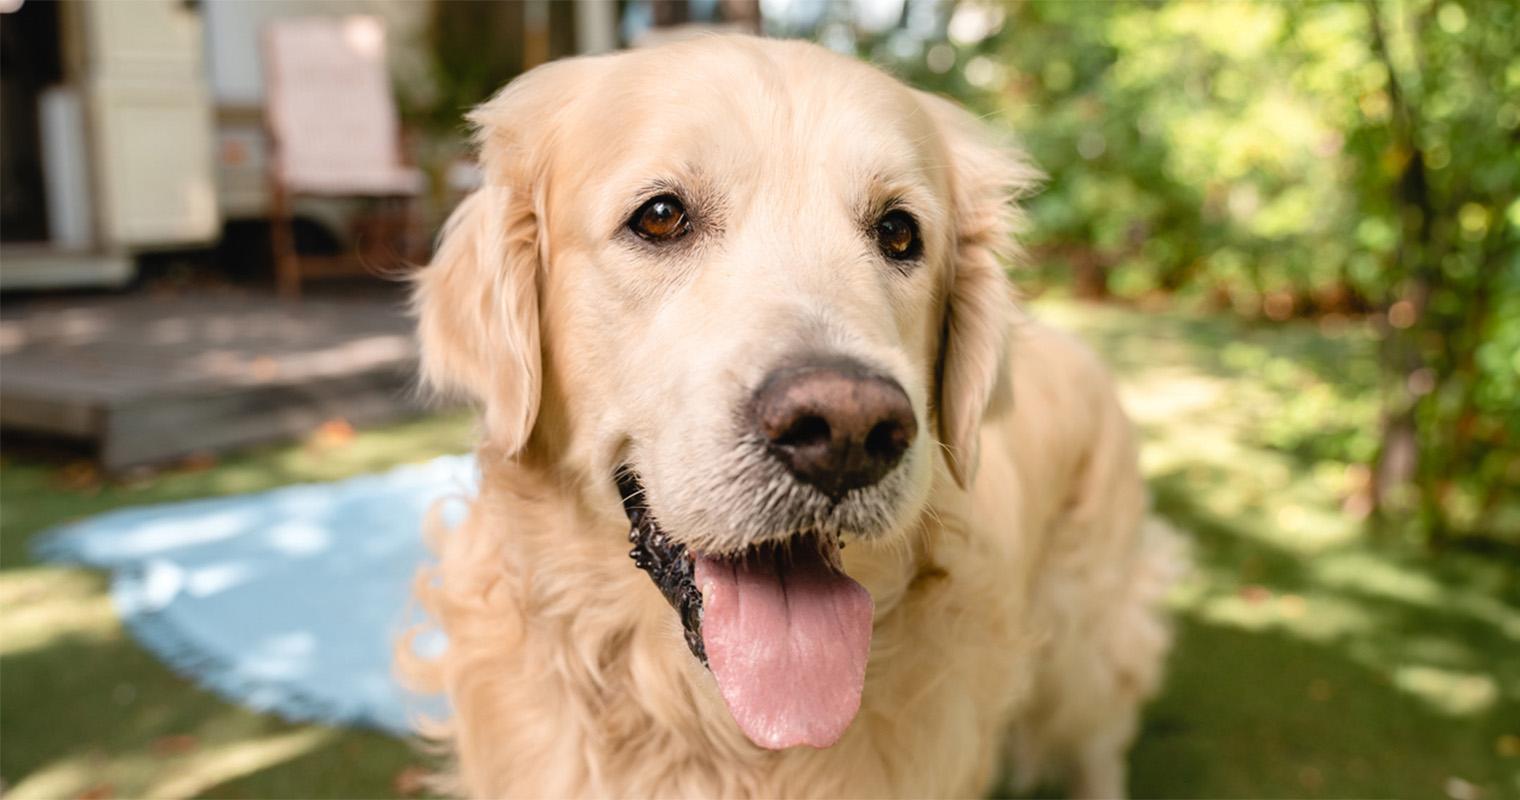 What is a Reasonable Rehoming fee for a Golden Retriever?